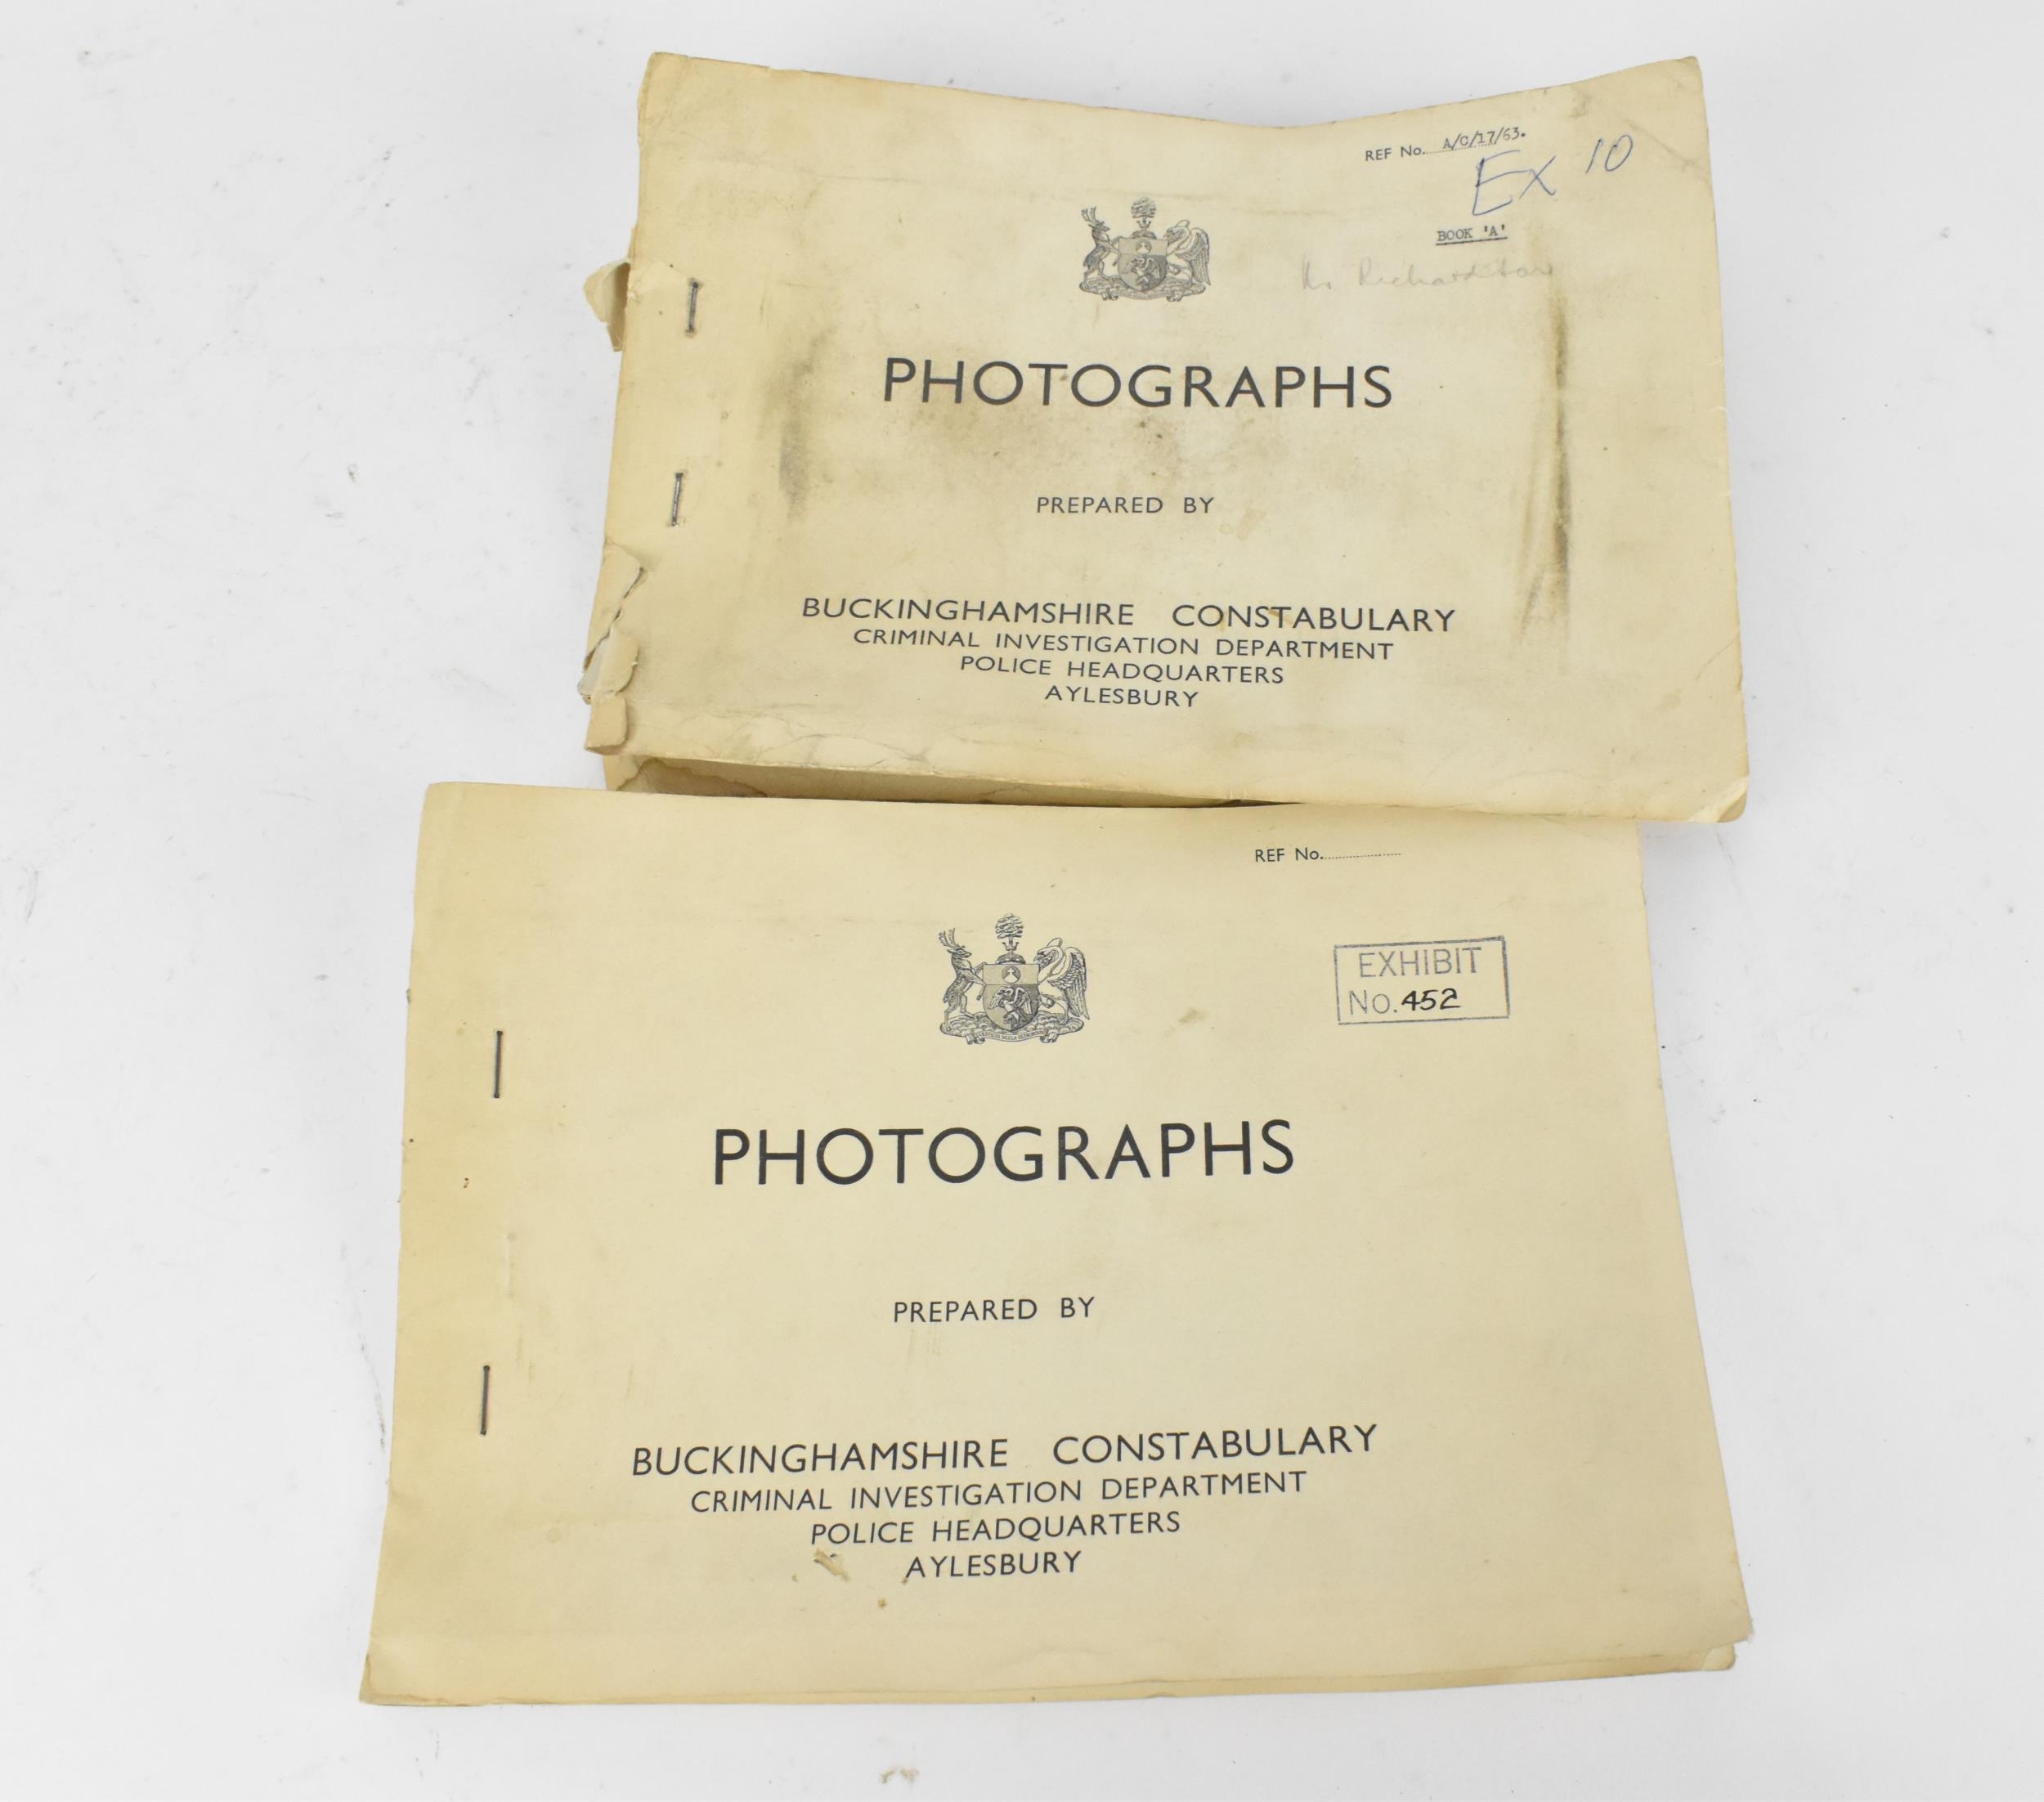 An original criminal investigation exhibit- photograph album linked to the Great Train Robbery of